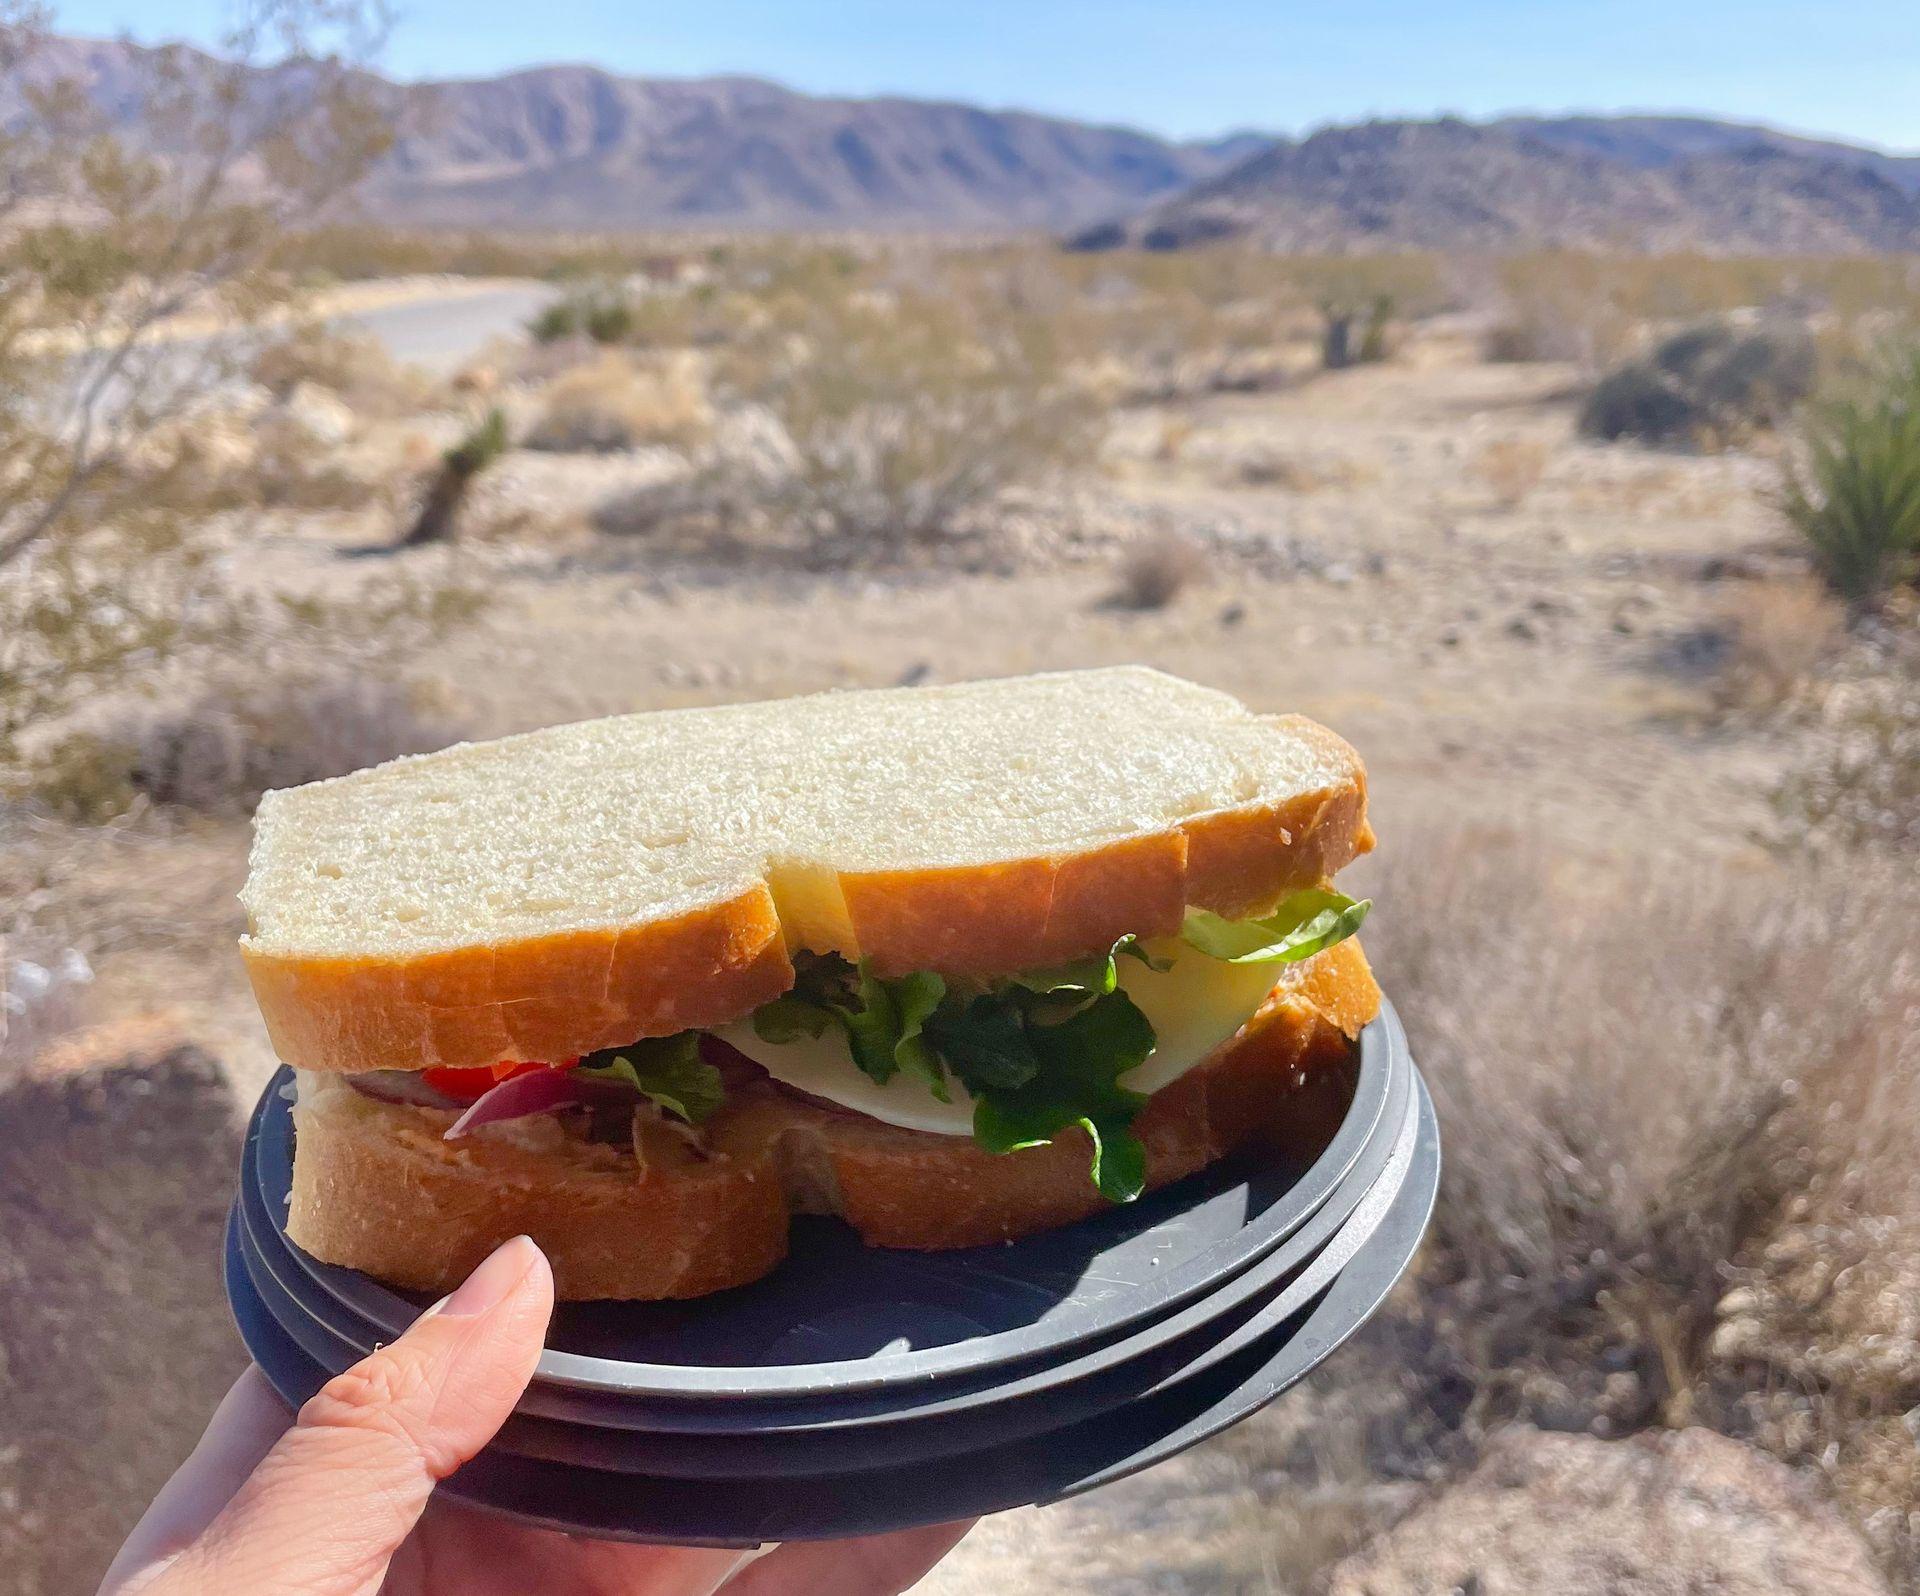 Holding up a sandwich with veggies, hummus and cheese in the desert.